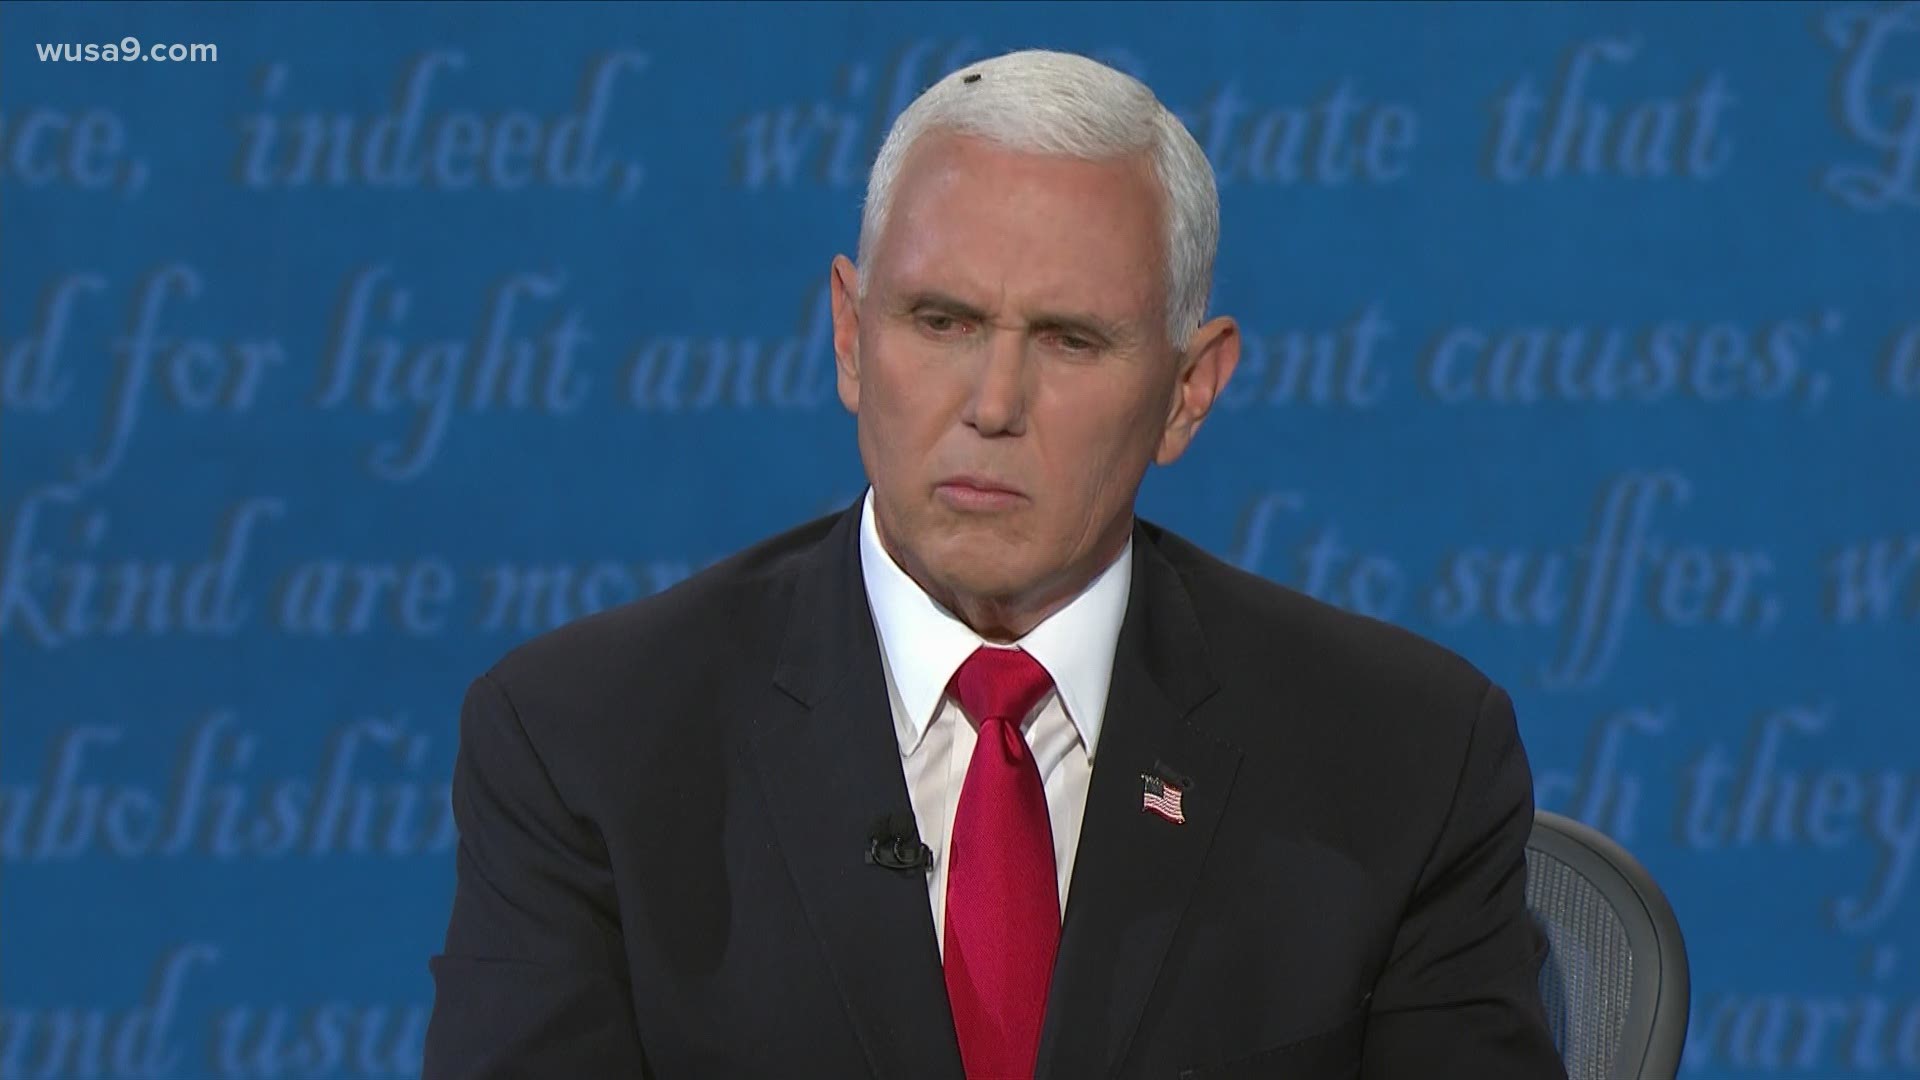 During the first and only VP debate a fly took center stage and landed on Mike Pence's head during a question about race in America.